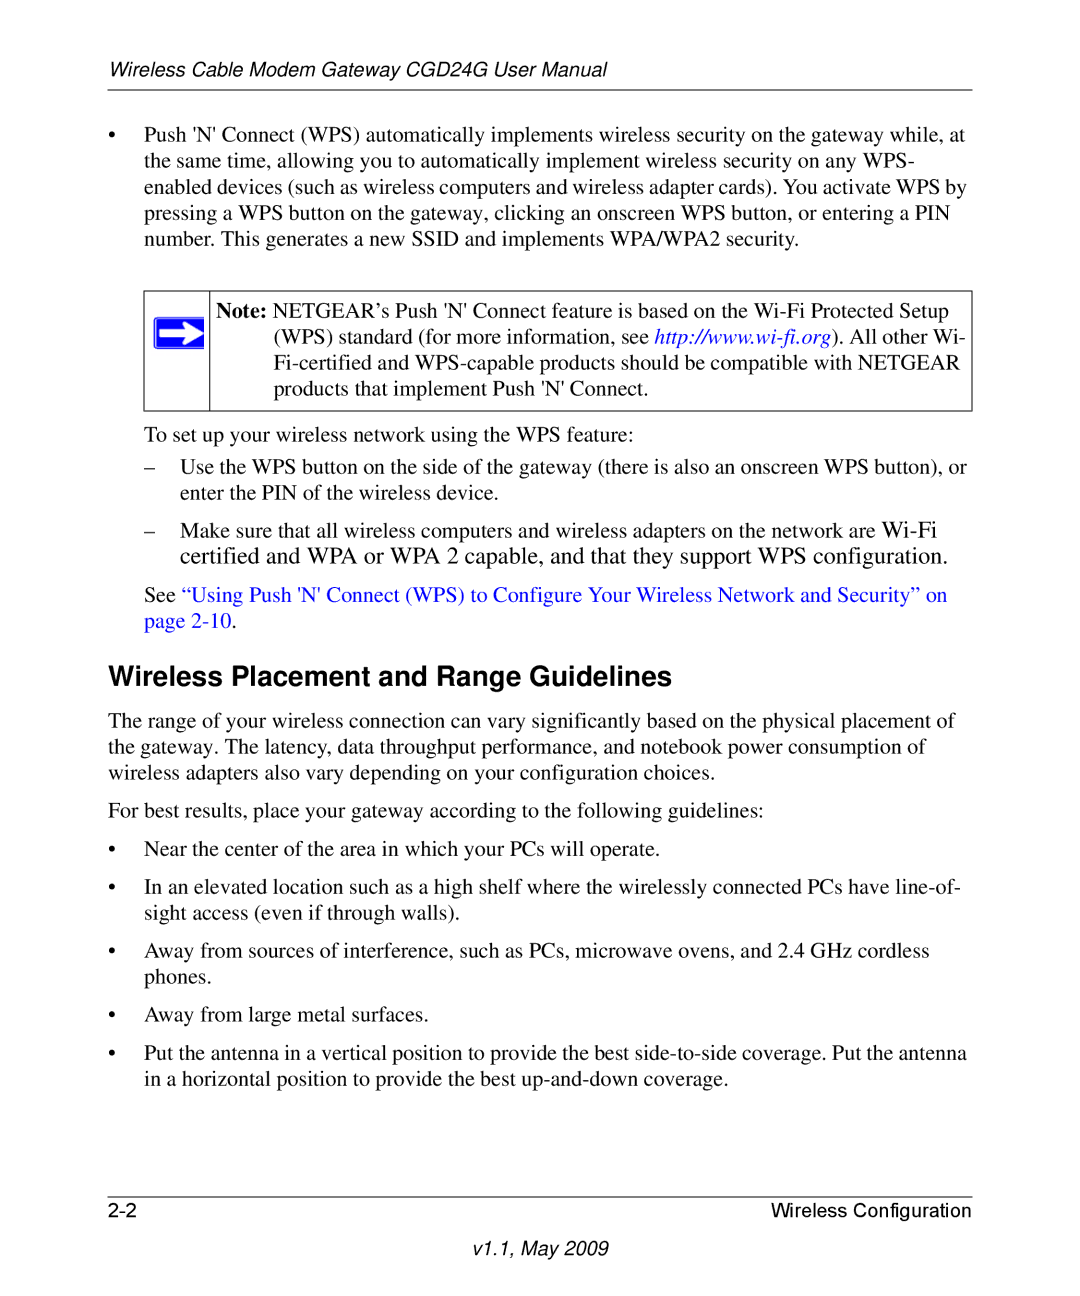 Gateway CGD24G user manual Wireless Placement and Range Guidelines 